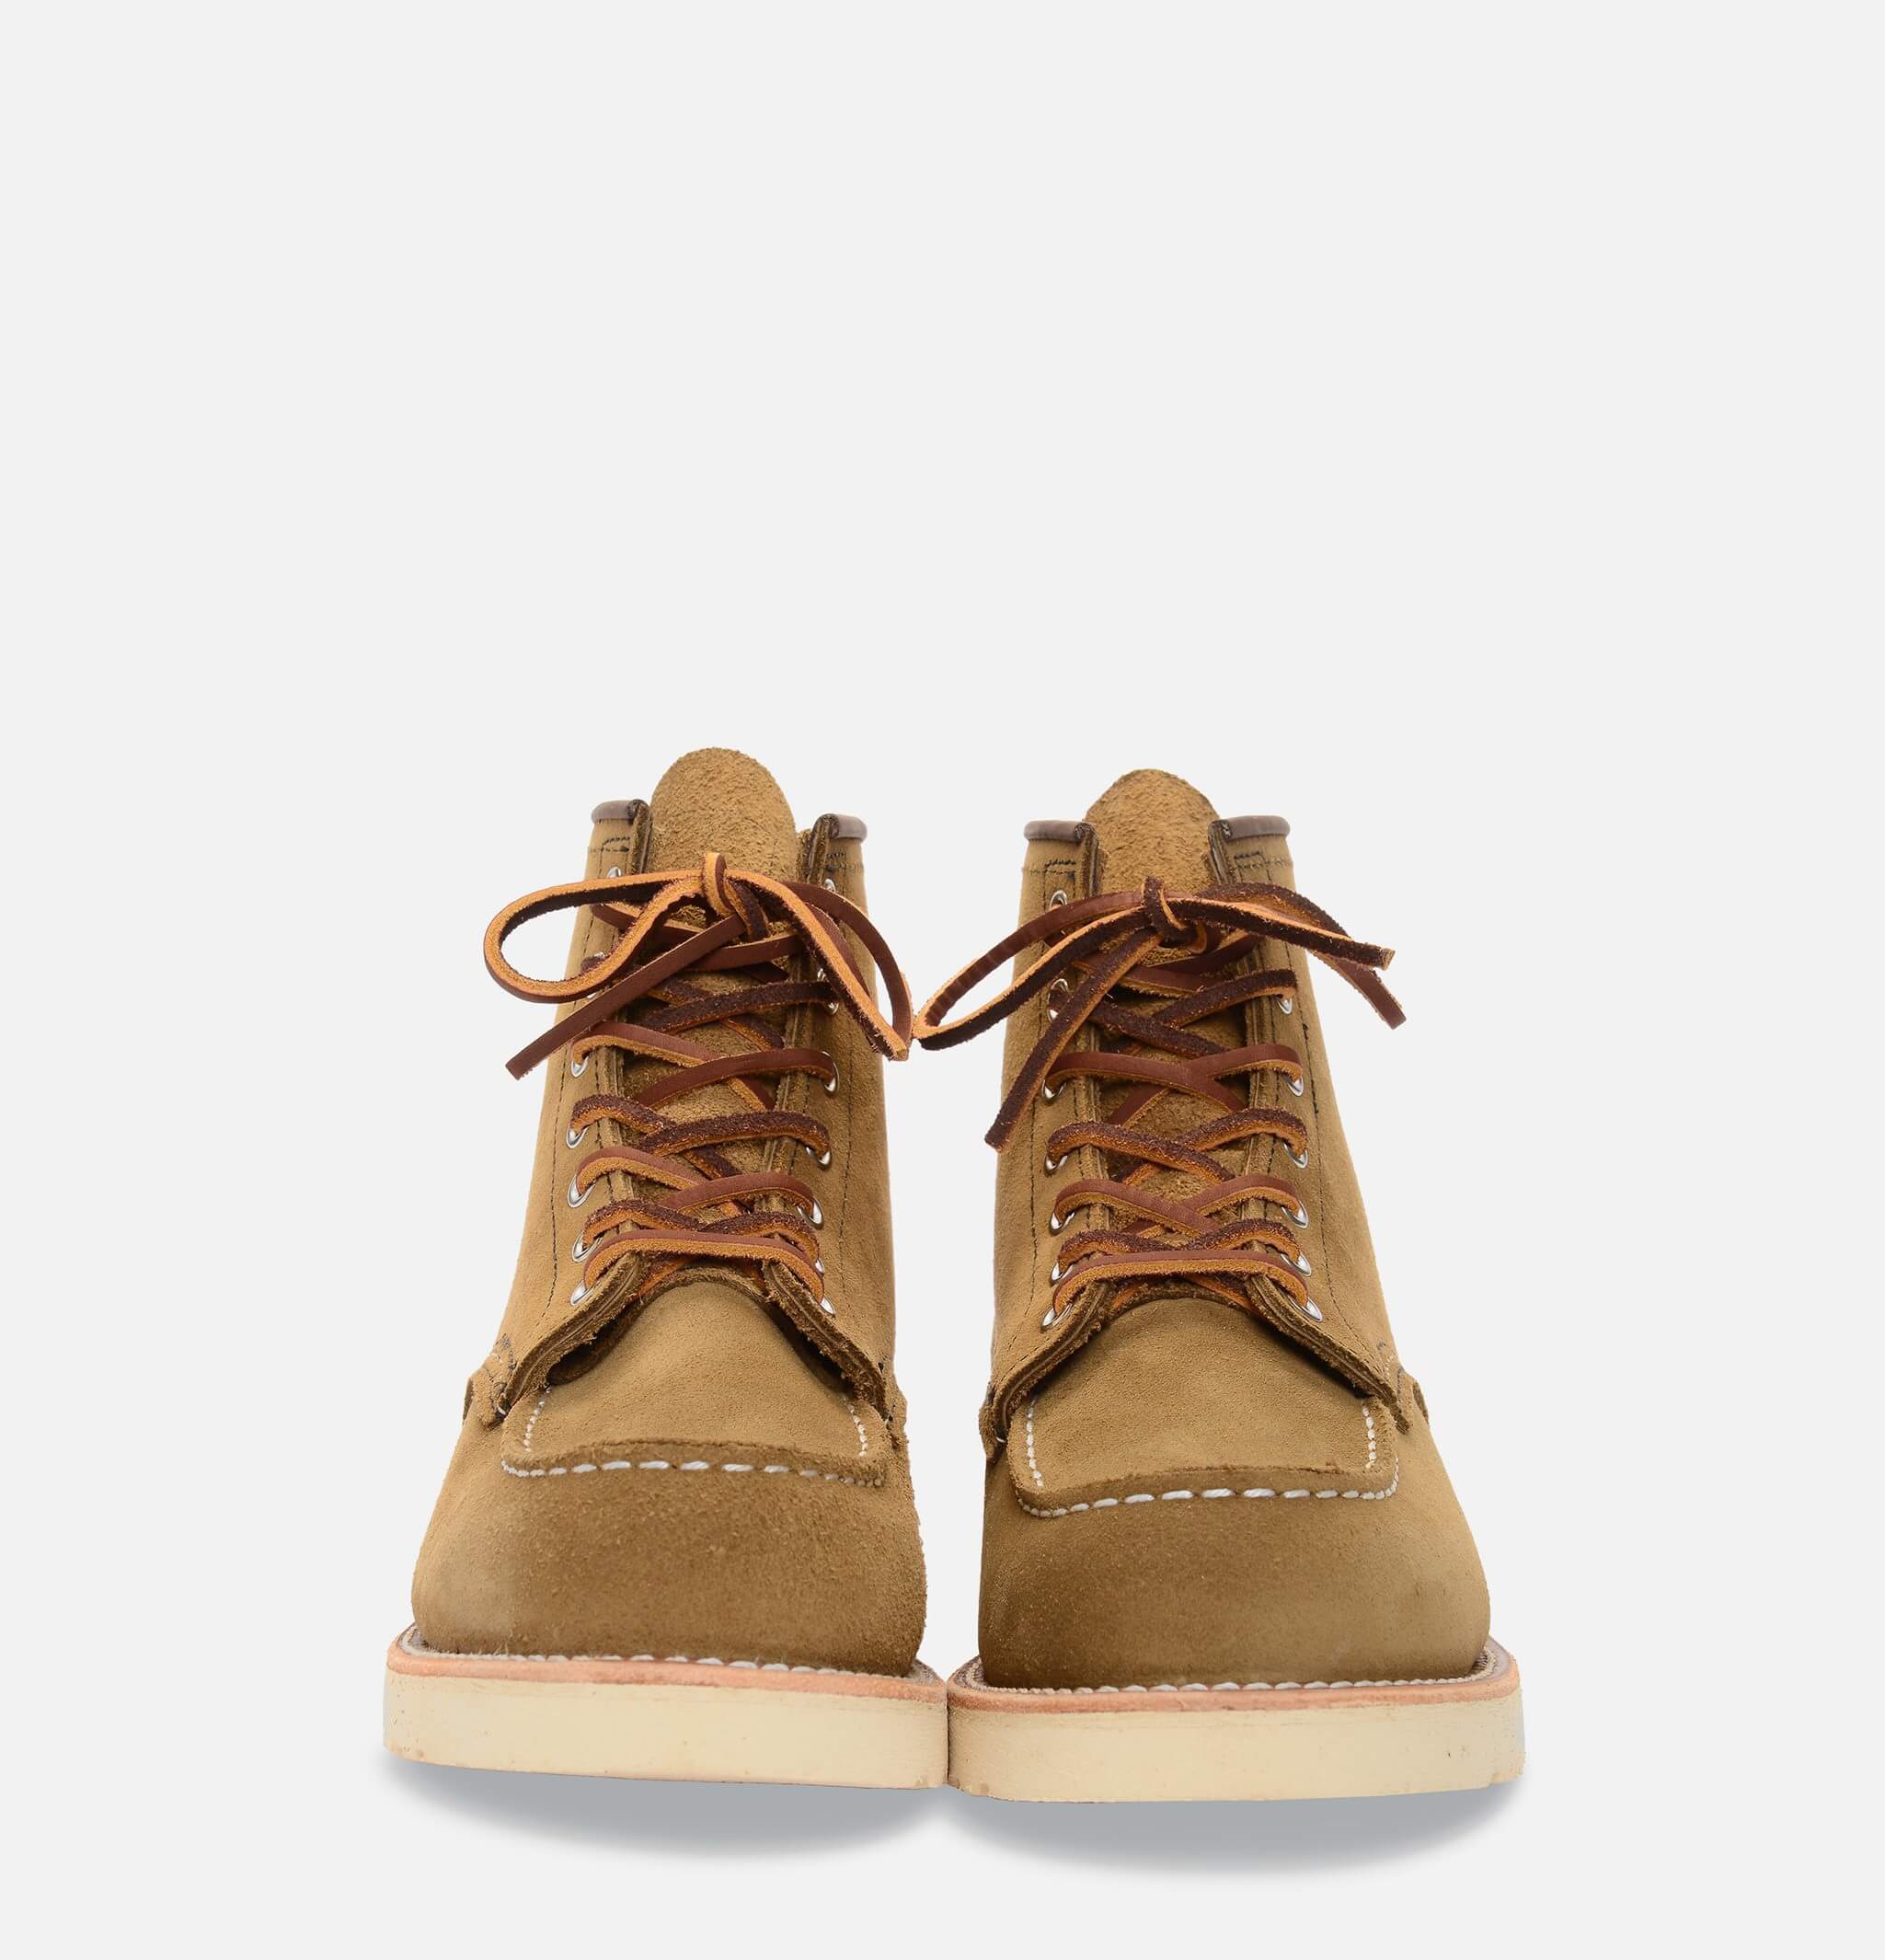 8881 - Moc Toe Olive Mohave